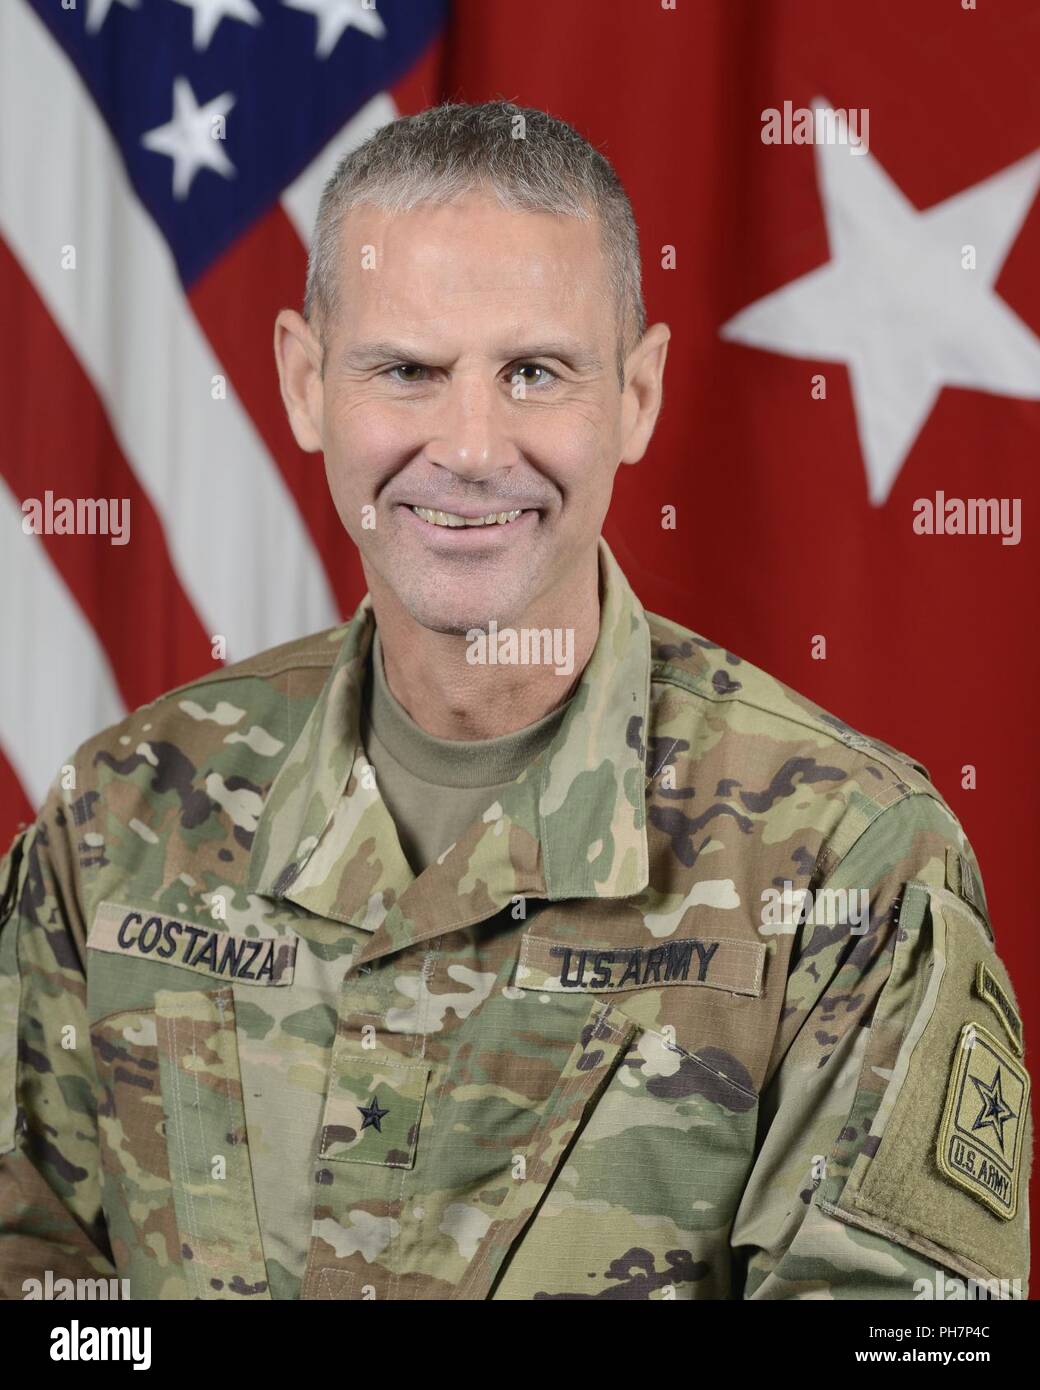 U.S. Army Brig. Gen. Charles Costanza, Director of Training, Army Headquarters G3/5/7,  poses for a command portrait in the Army portrait studio at the Pentagon in Arlington, Va., June 22, 2018. Stock Photo